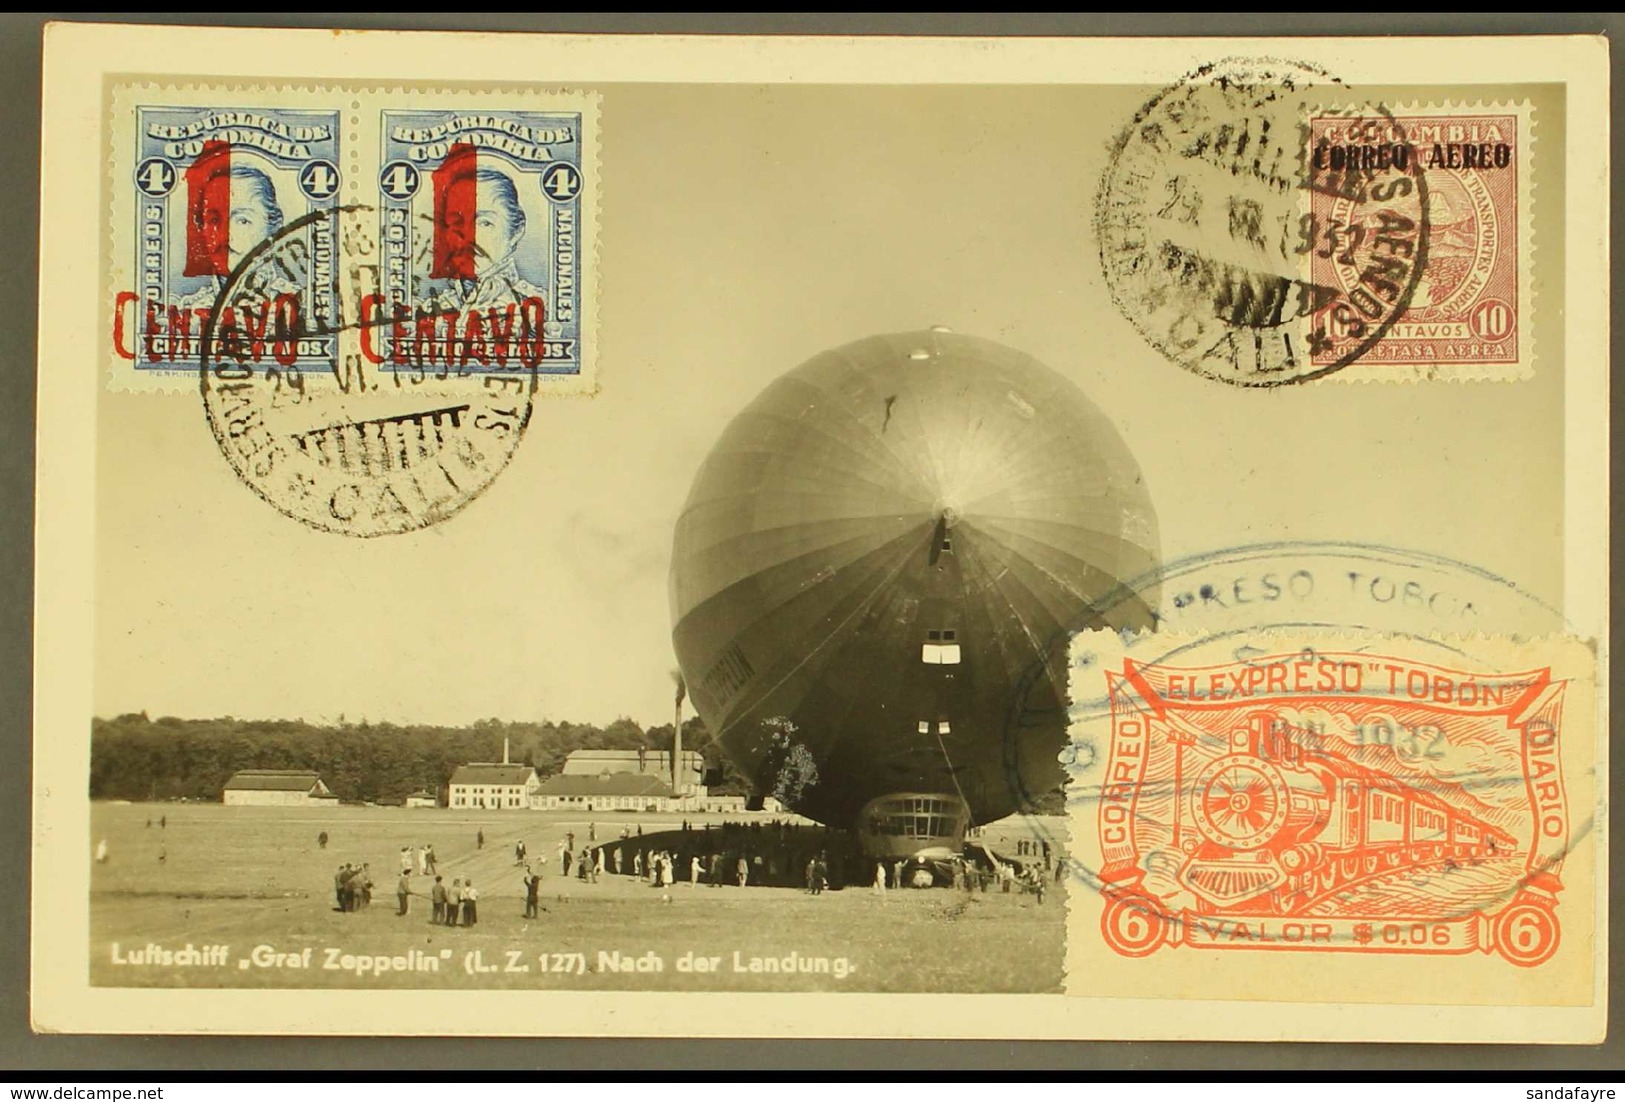 1932 PPC Of LZ127 Zeppelin Franked Colombia 1c On 4c Pair, Scadta 10c Mauve And Expreso Tobon 6c Vermilion Sent From Bog - Kolumbien